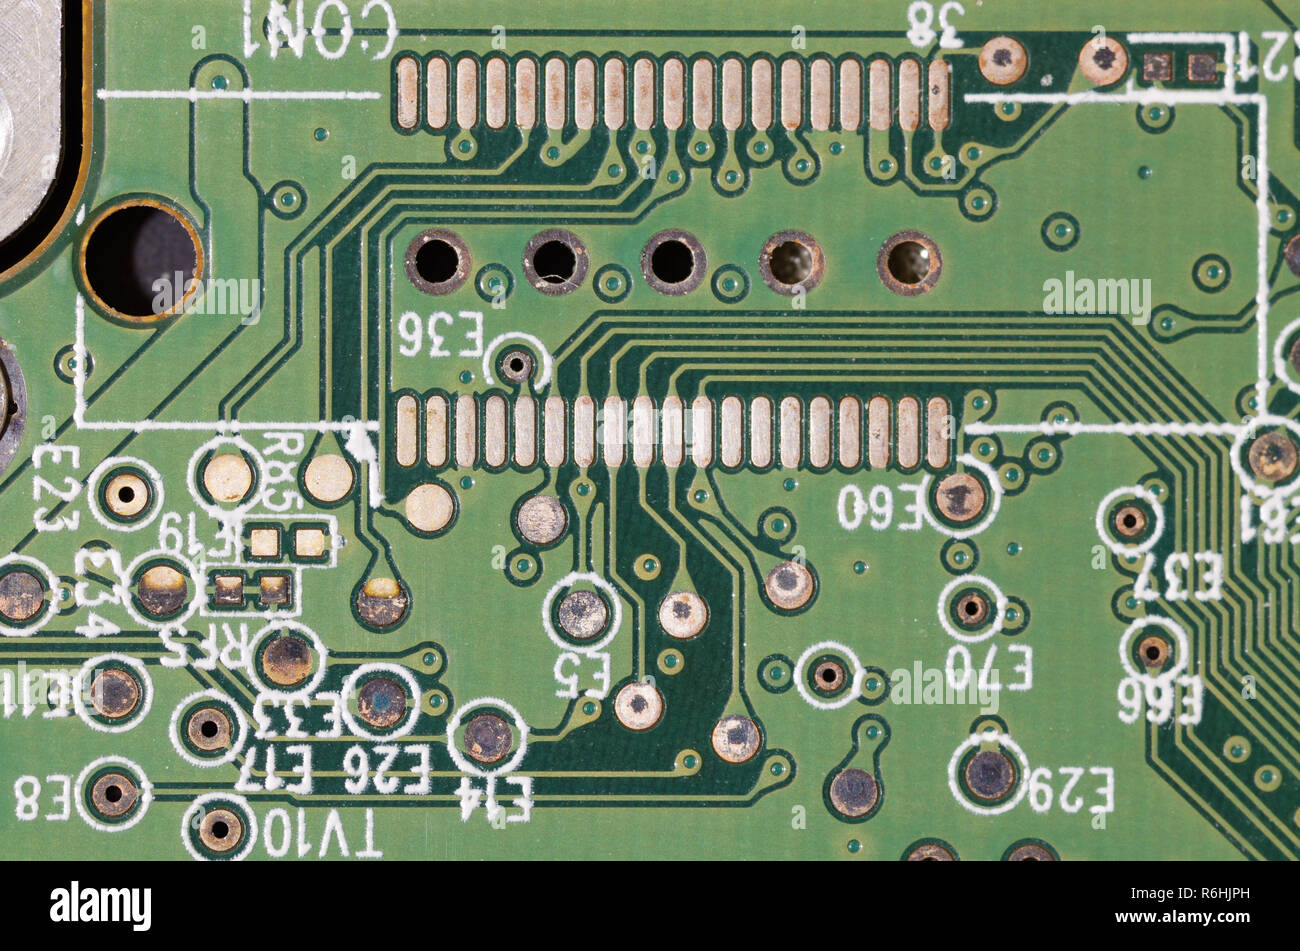 integrated circuit used in electronics.Modern equipment consists of such schemes. Stock Photo